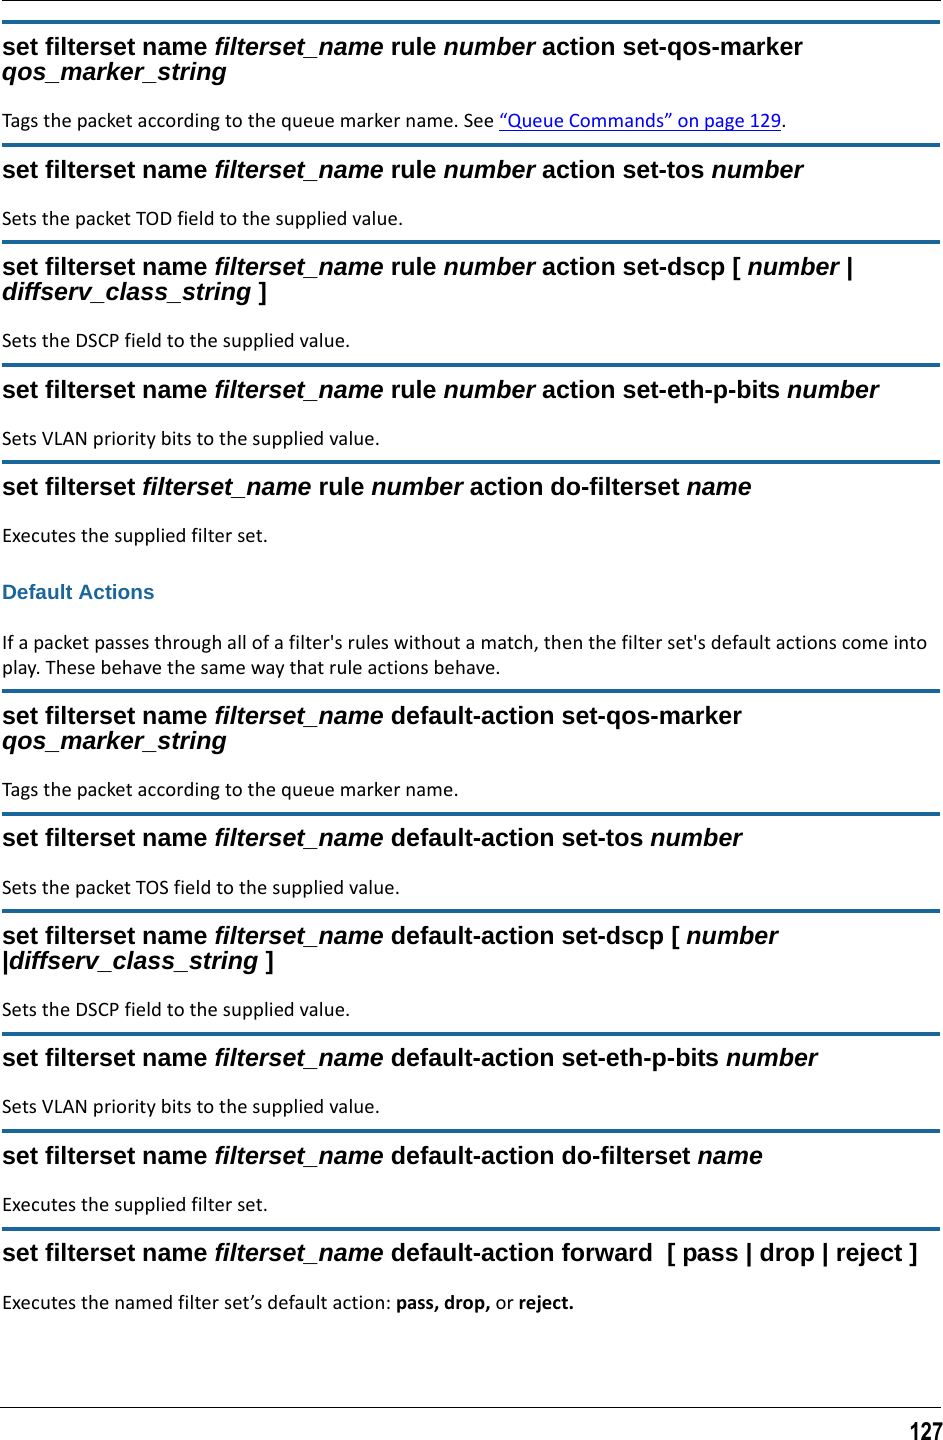 127set filterset name filterset_name rule number action set-qos-marker qos_marker_stringTags the packet according to the queue marker name. See “Queue Commands” on page 129.set filterset name filterset_name rule number action set-tos numberSets the packet TOD field to the supplied value.set filterset name filterset_name rule number action set-dscp [ number | diffserv_class_string ]Sets the DSCP field to the supplied value.set filterset name filterset_name rule number action set-eth-p-bits numberSets VLAN priority bits to the supplied value.set filterset filterset_name rule number action do-filterset nameExecutes the supplied filter set.Default ActionsIf a packet passes through all of a filter&apos;s rules without a match, then the filter set&apos;s default actions come into play. These behave the same way that rule actions behave.set filterset name filterset_name default-action set-qos-marker qos_marker_stringTags the packet according to the queue marker name.set filterset name filterset_name default-action set-tos numberSets the packet TOS field to the supplied value.set filterset name filterset_name default-action set-dscp [ number |diffserv_class_string ]Sets the DSCP field to the supplied value.set filterset name filterset_name default-action set-eth-p-bits numberSets VLAN priority bits to the supplied value.set filterset name filterset_name default-action do-filterset nameExecutes the supplied filter set.set filterset name filterset_name default-action forward  [ pass | drop | reject ]Executes the named filter set’s default action: pass, drop, or reject.